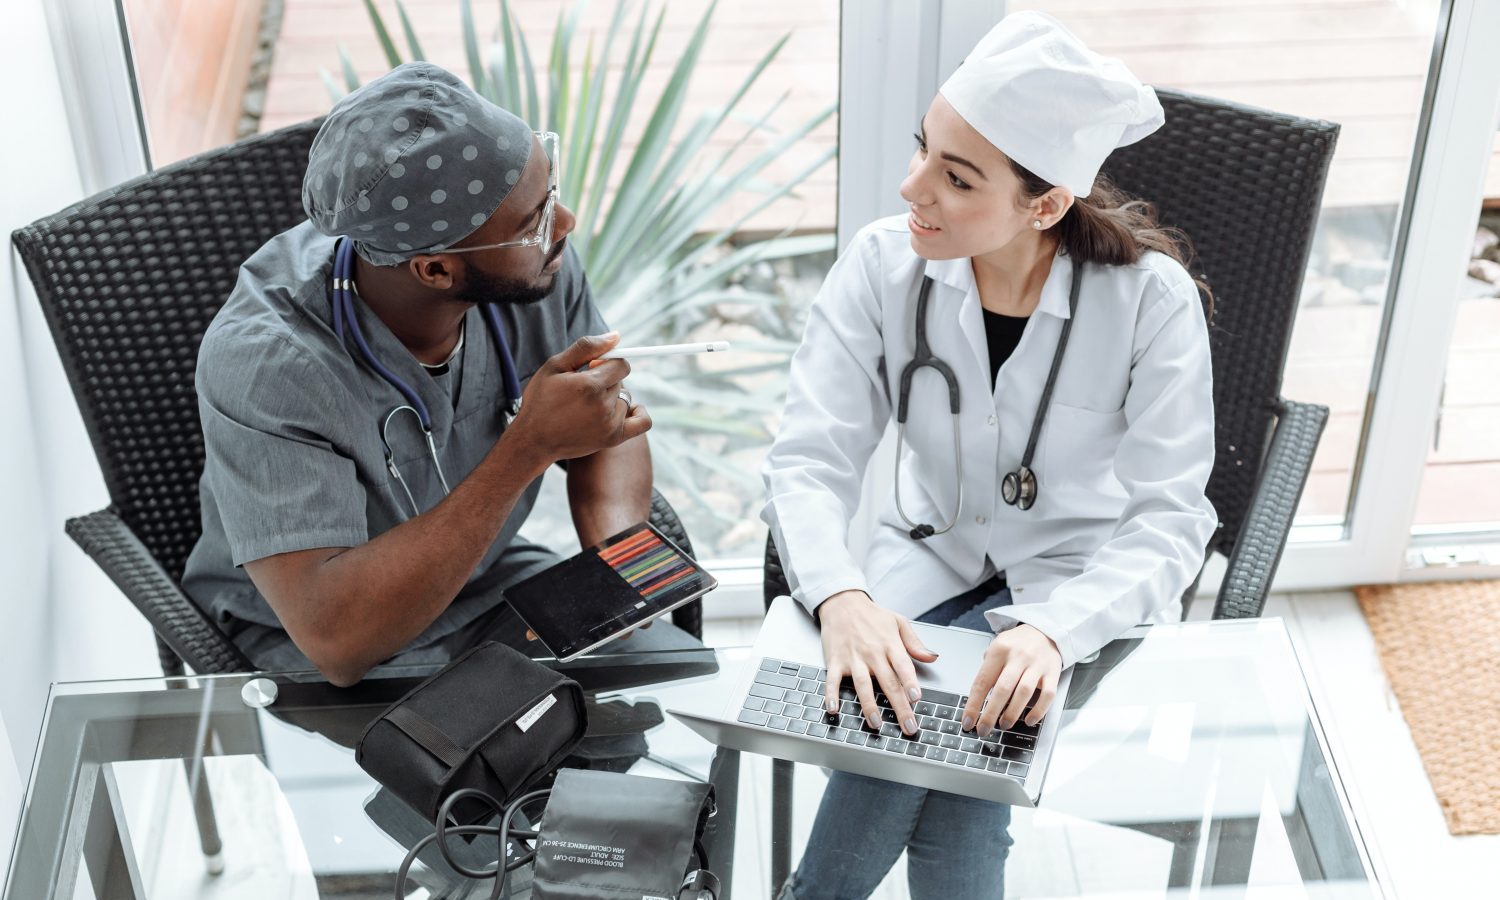 4 Things To Consider When Looking For A Medical Marijuana Doctor